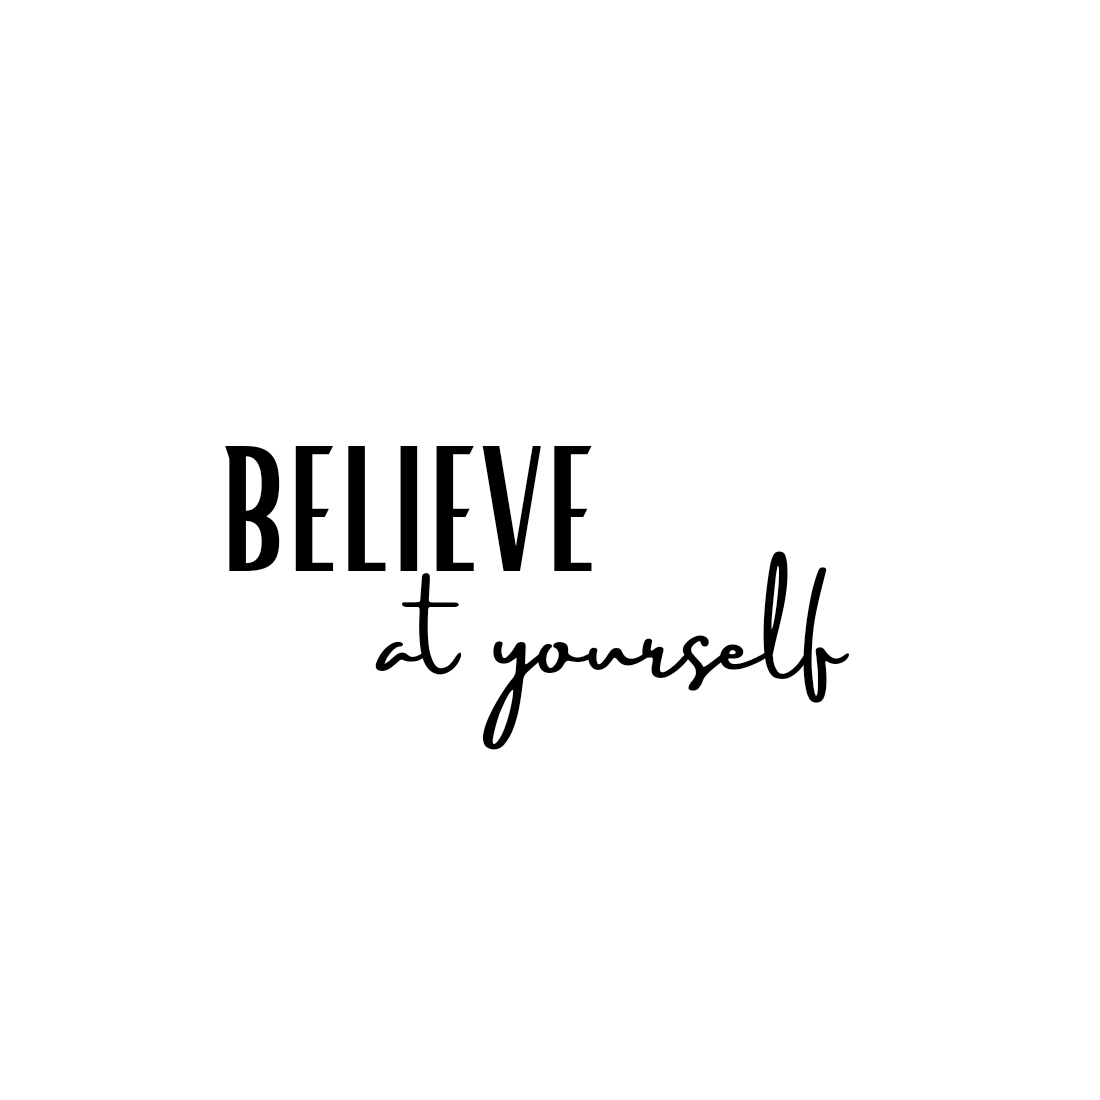 SVG for T Shirt, BELIEVE at yourself SVG, BELIEVE at yourself PNG cover image.